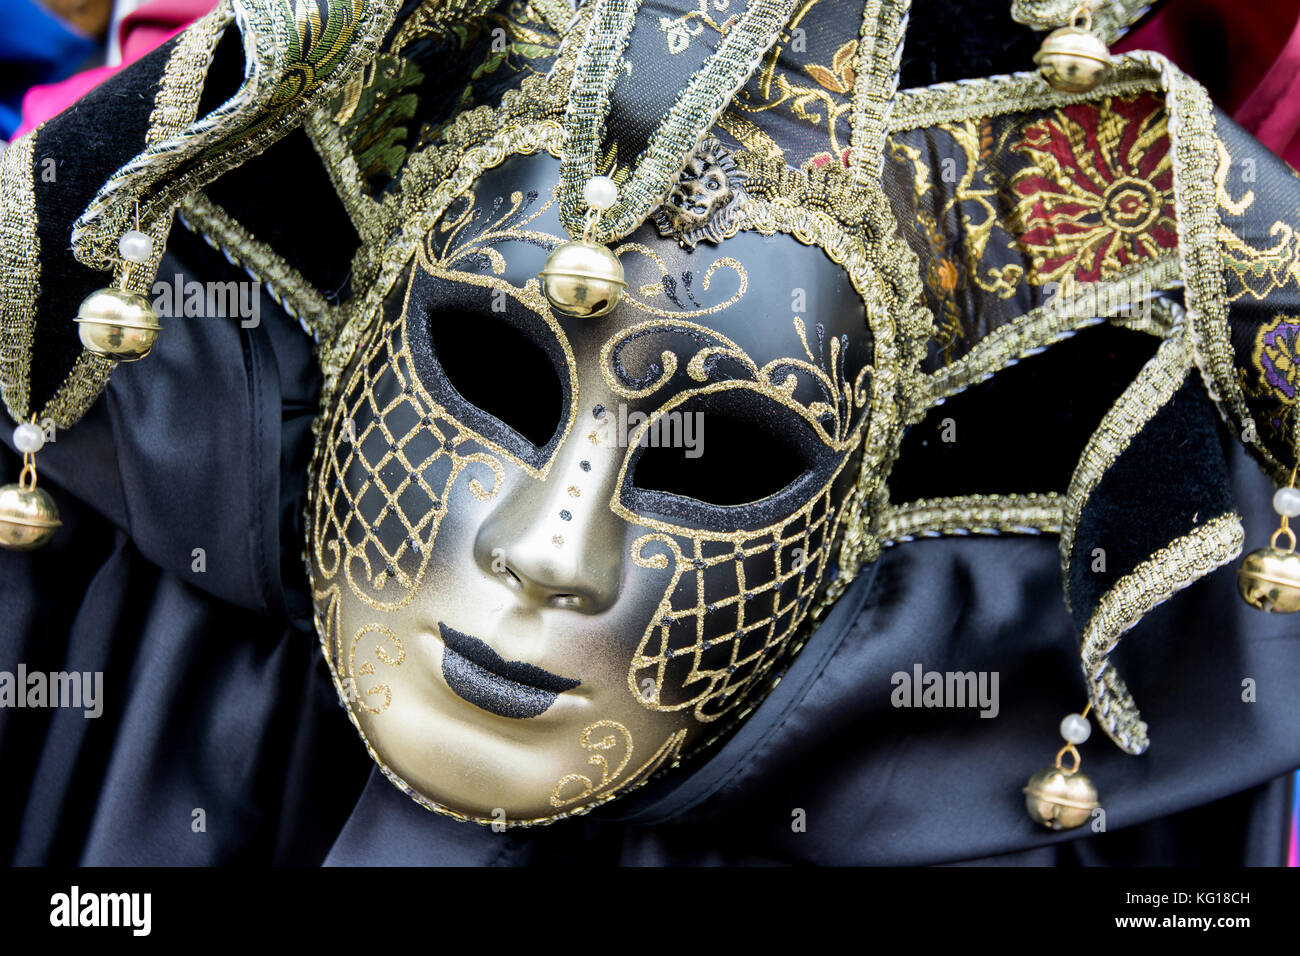 Venice, Italy - January 31, 2016: Traditional carnival masks for sale in a shop in Venice Stock Photo